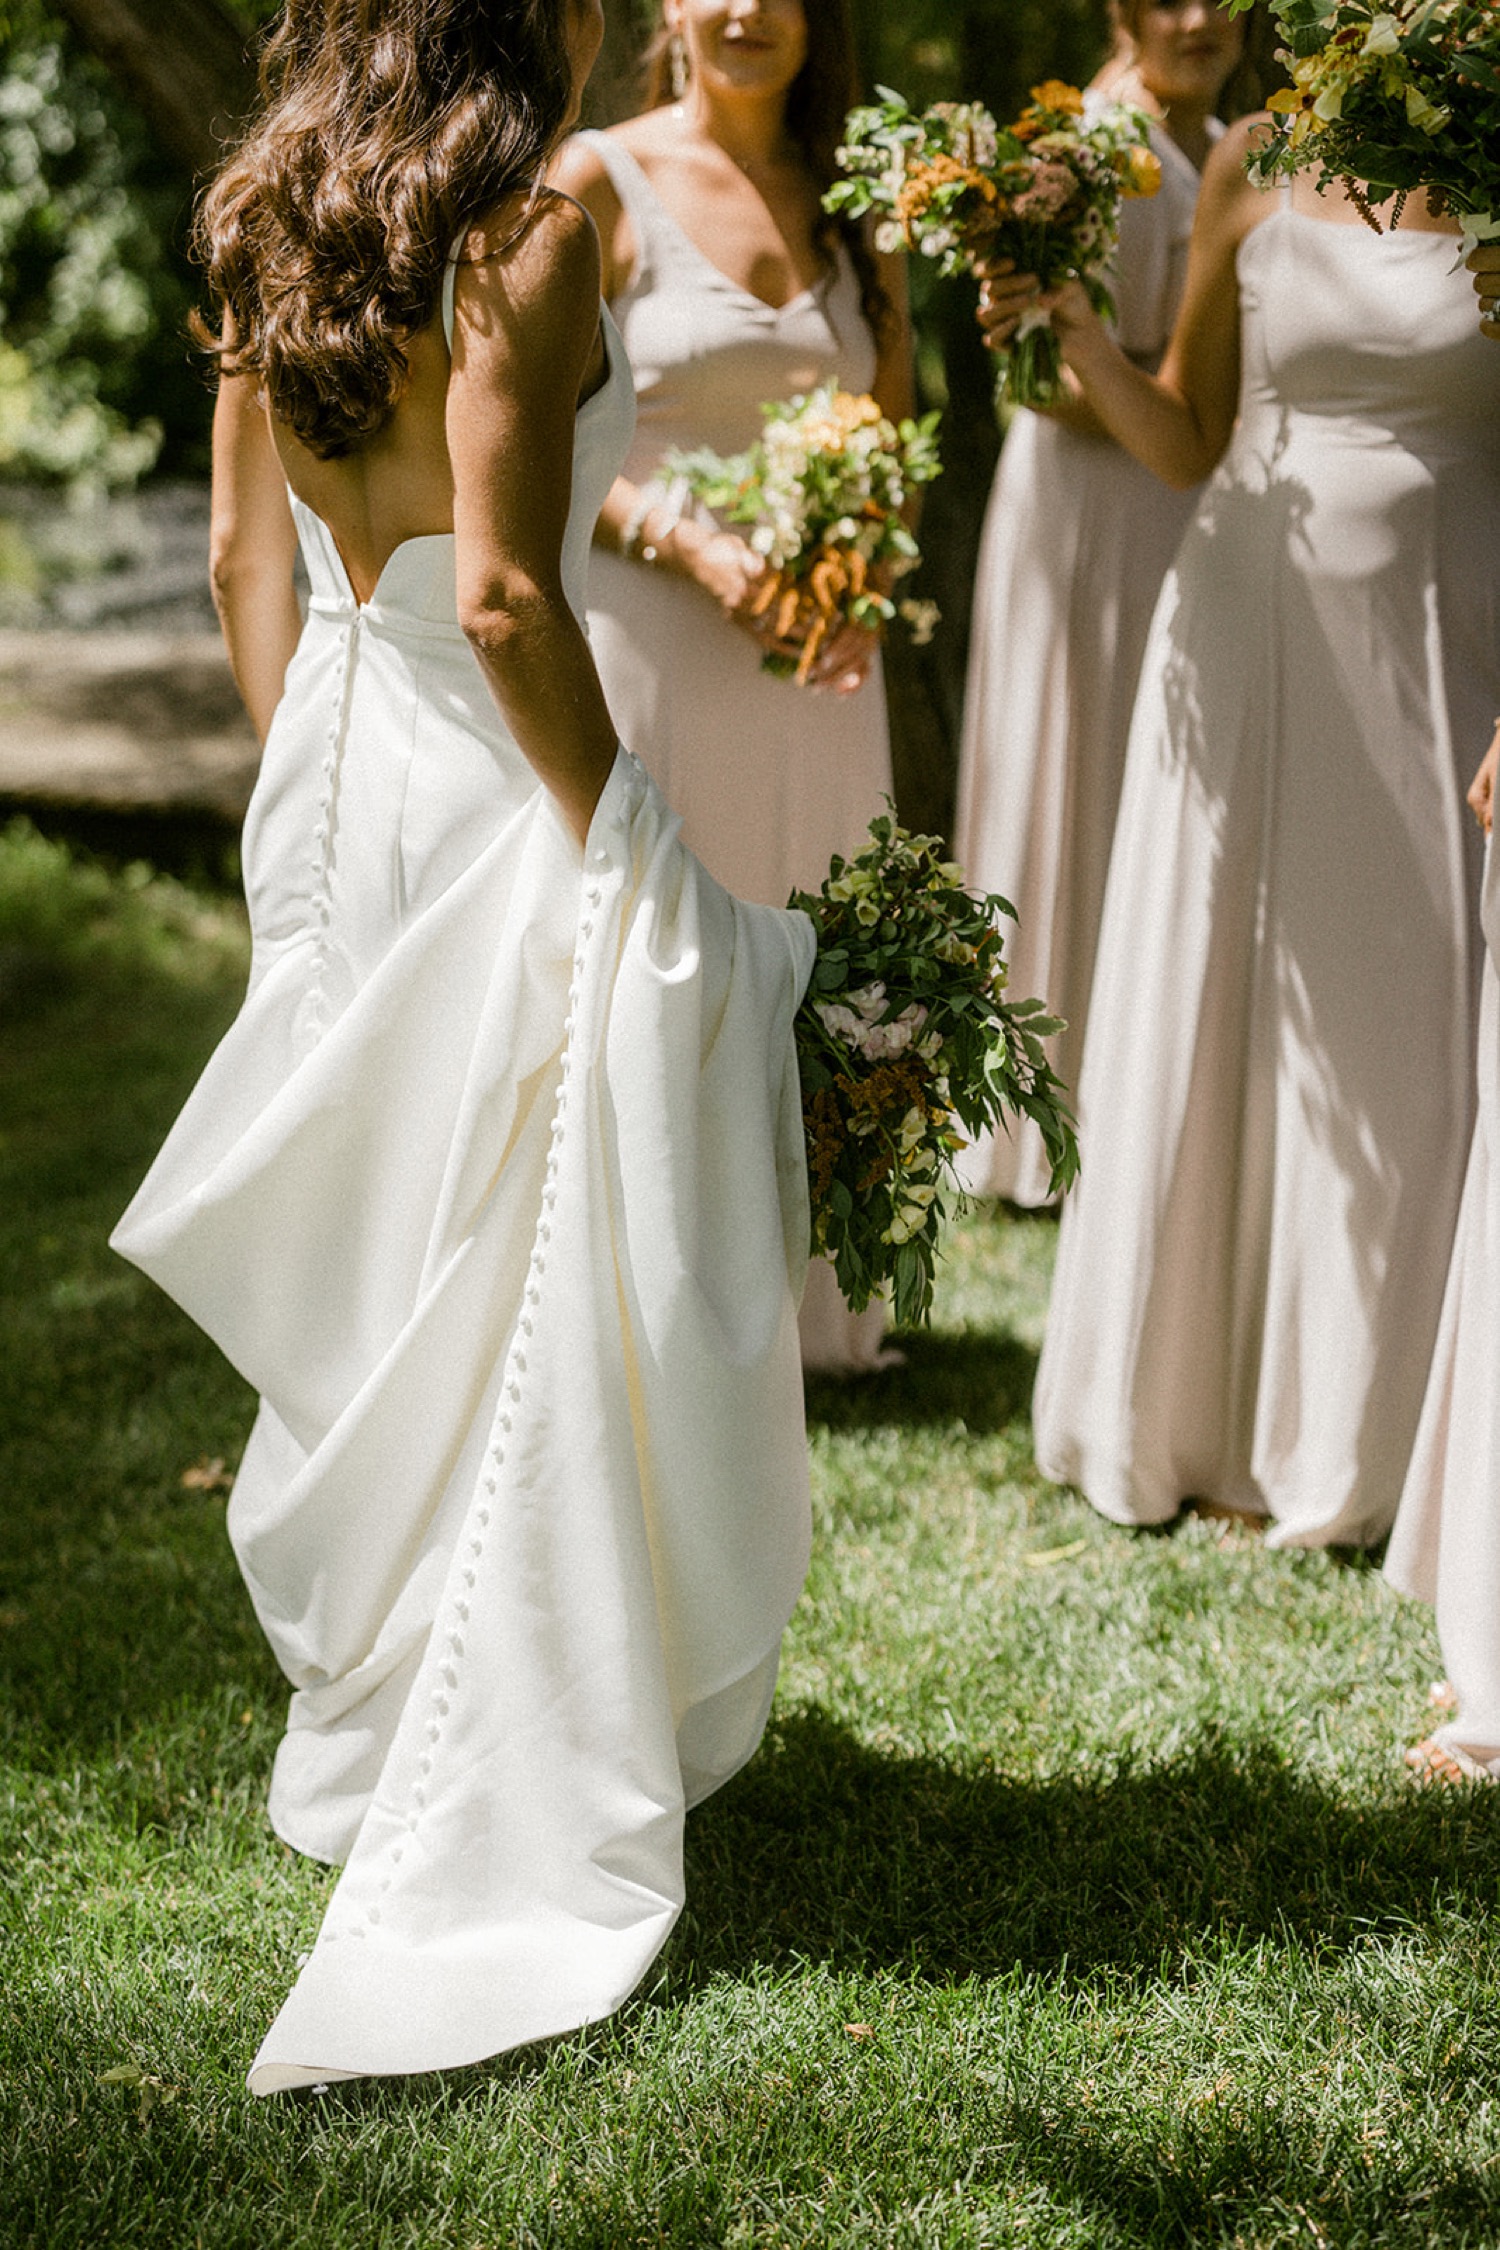 brides and bridesmaids dresses and bouquet